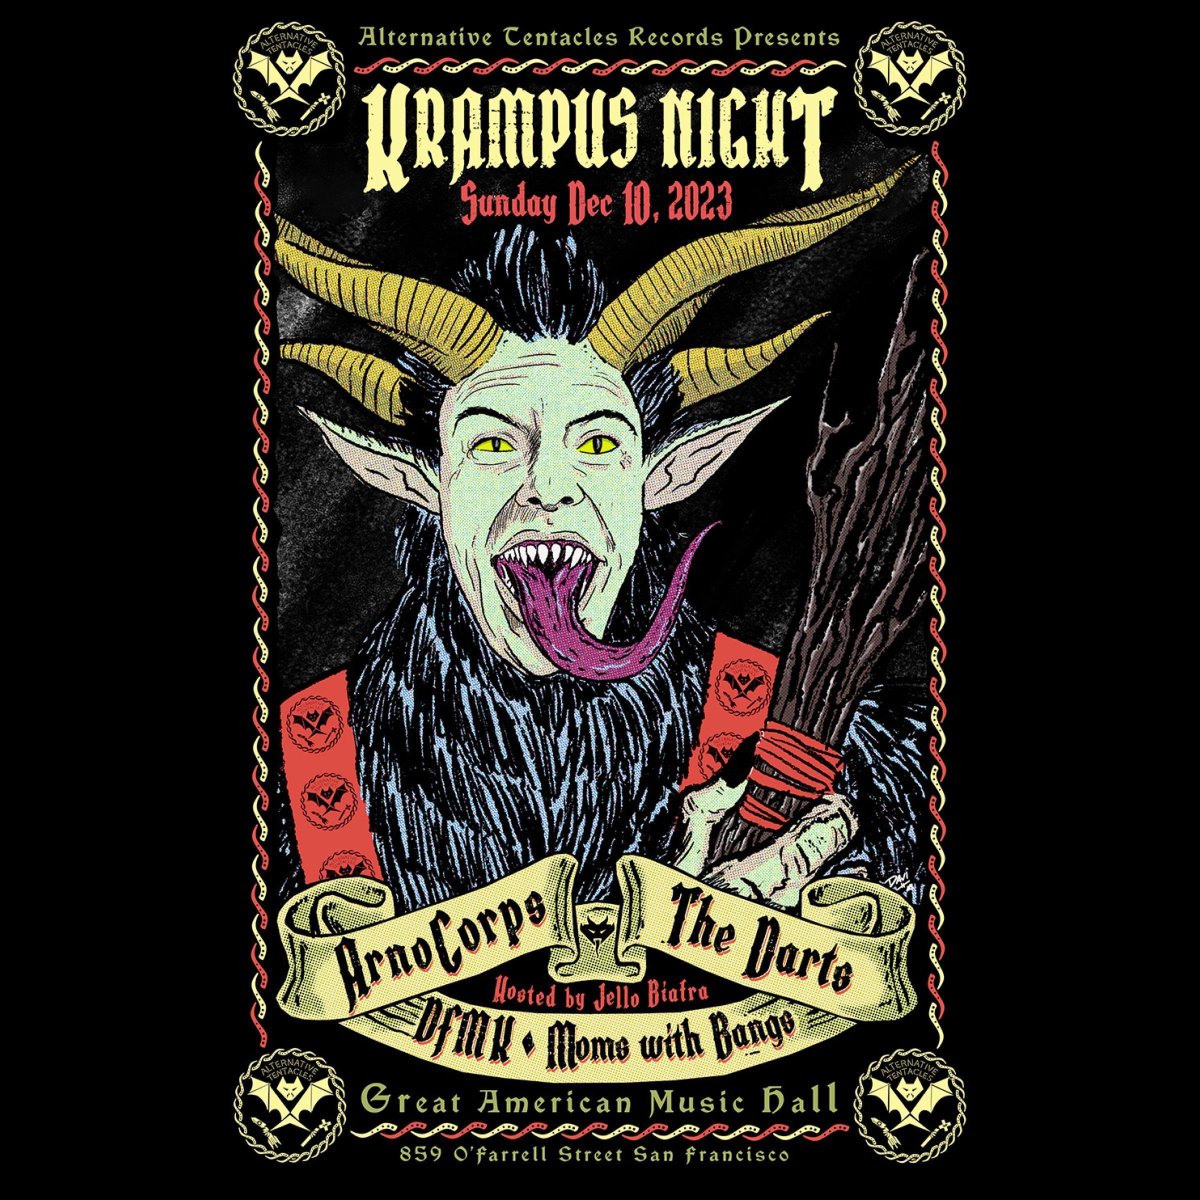 ArnoCorps is playing Krampus Night! Catch them in San Francisco on Sunday, Dec. 10th at The Great American Music Hall with The Darts, DFMK, and Moms With Bangs! Hosted by none other than Jello Biafra! Tickets on sale now at buff.ly/48YqWIe